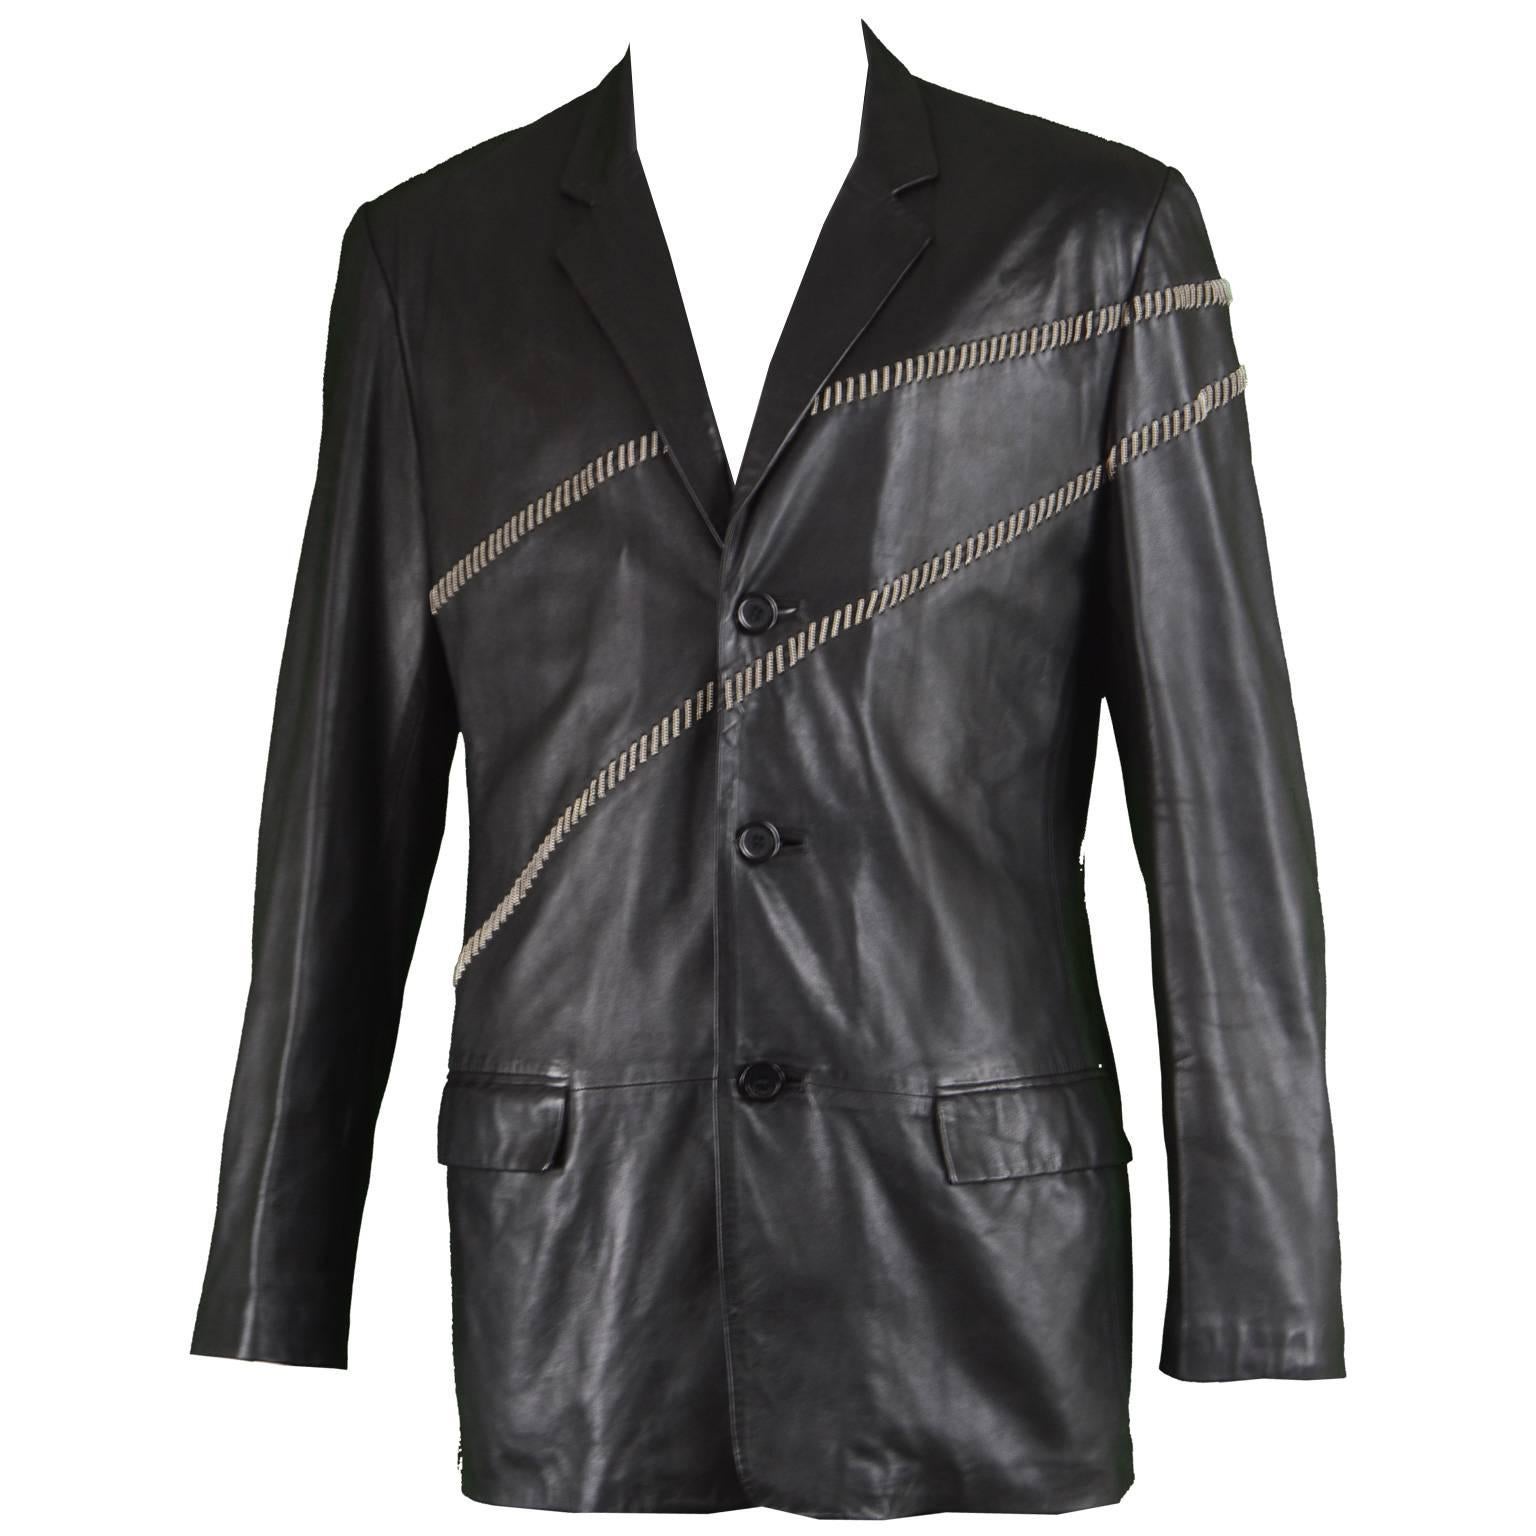 Gianni Versace Vintage Men's Leather Chain Embroidered Blazer Jacket, 1990s